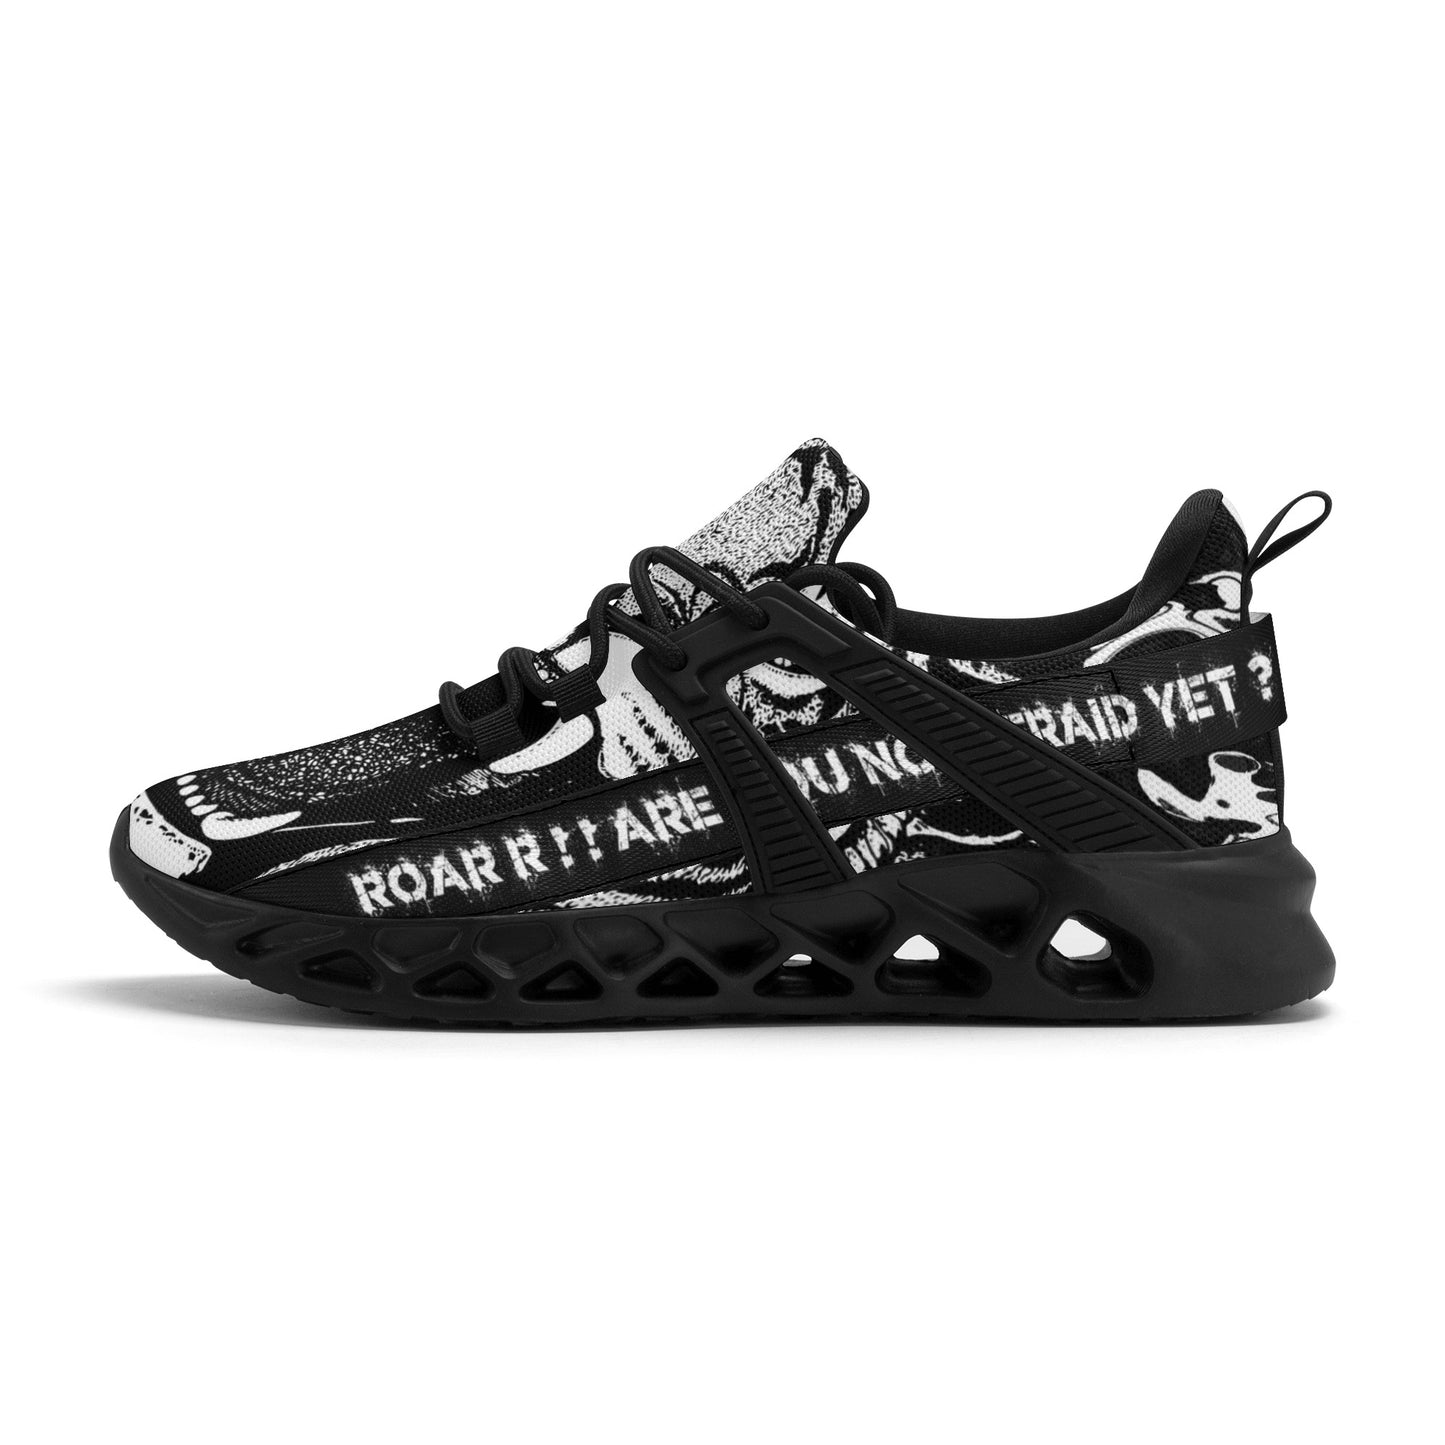 Roaring Like You Are Not Afraid Running Shoes For Men to Stay on Track and Motivated